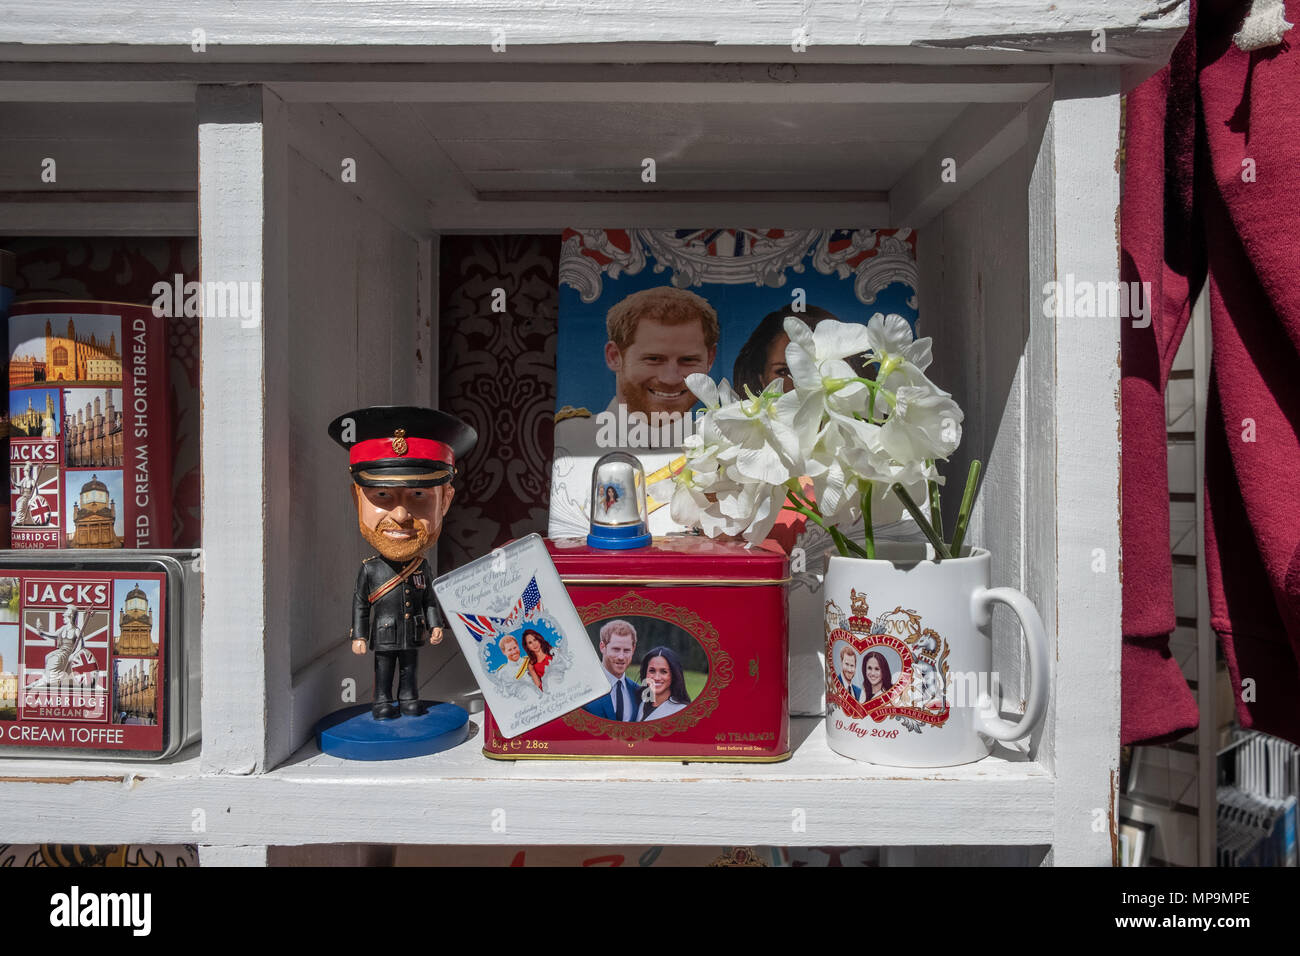 Prince Harry and Megham Markle souvenirs in a s shop window in Cambridge, UK. Stock Photo